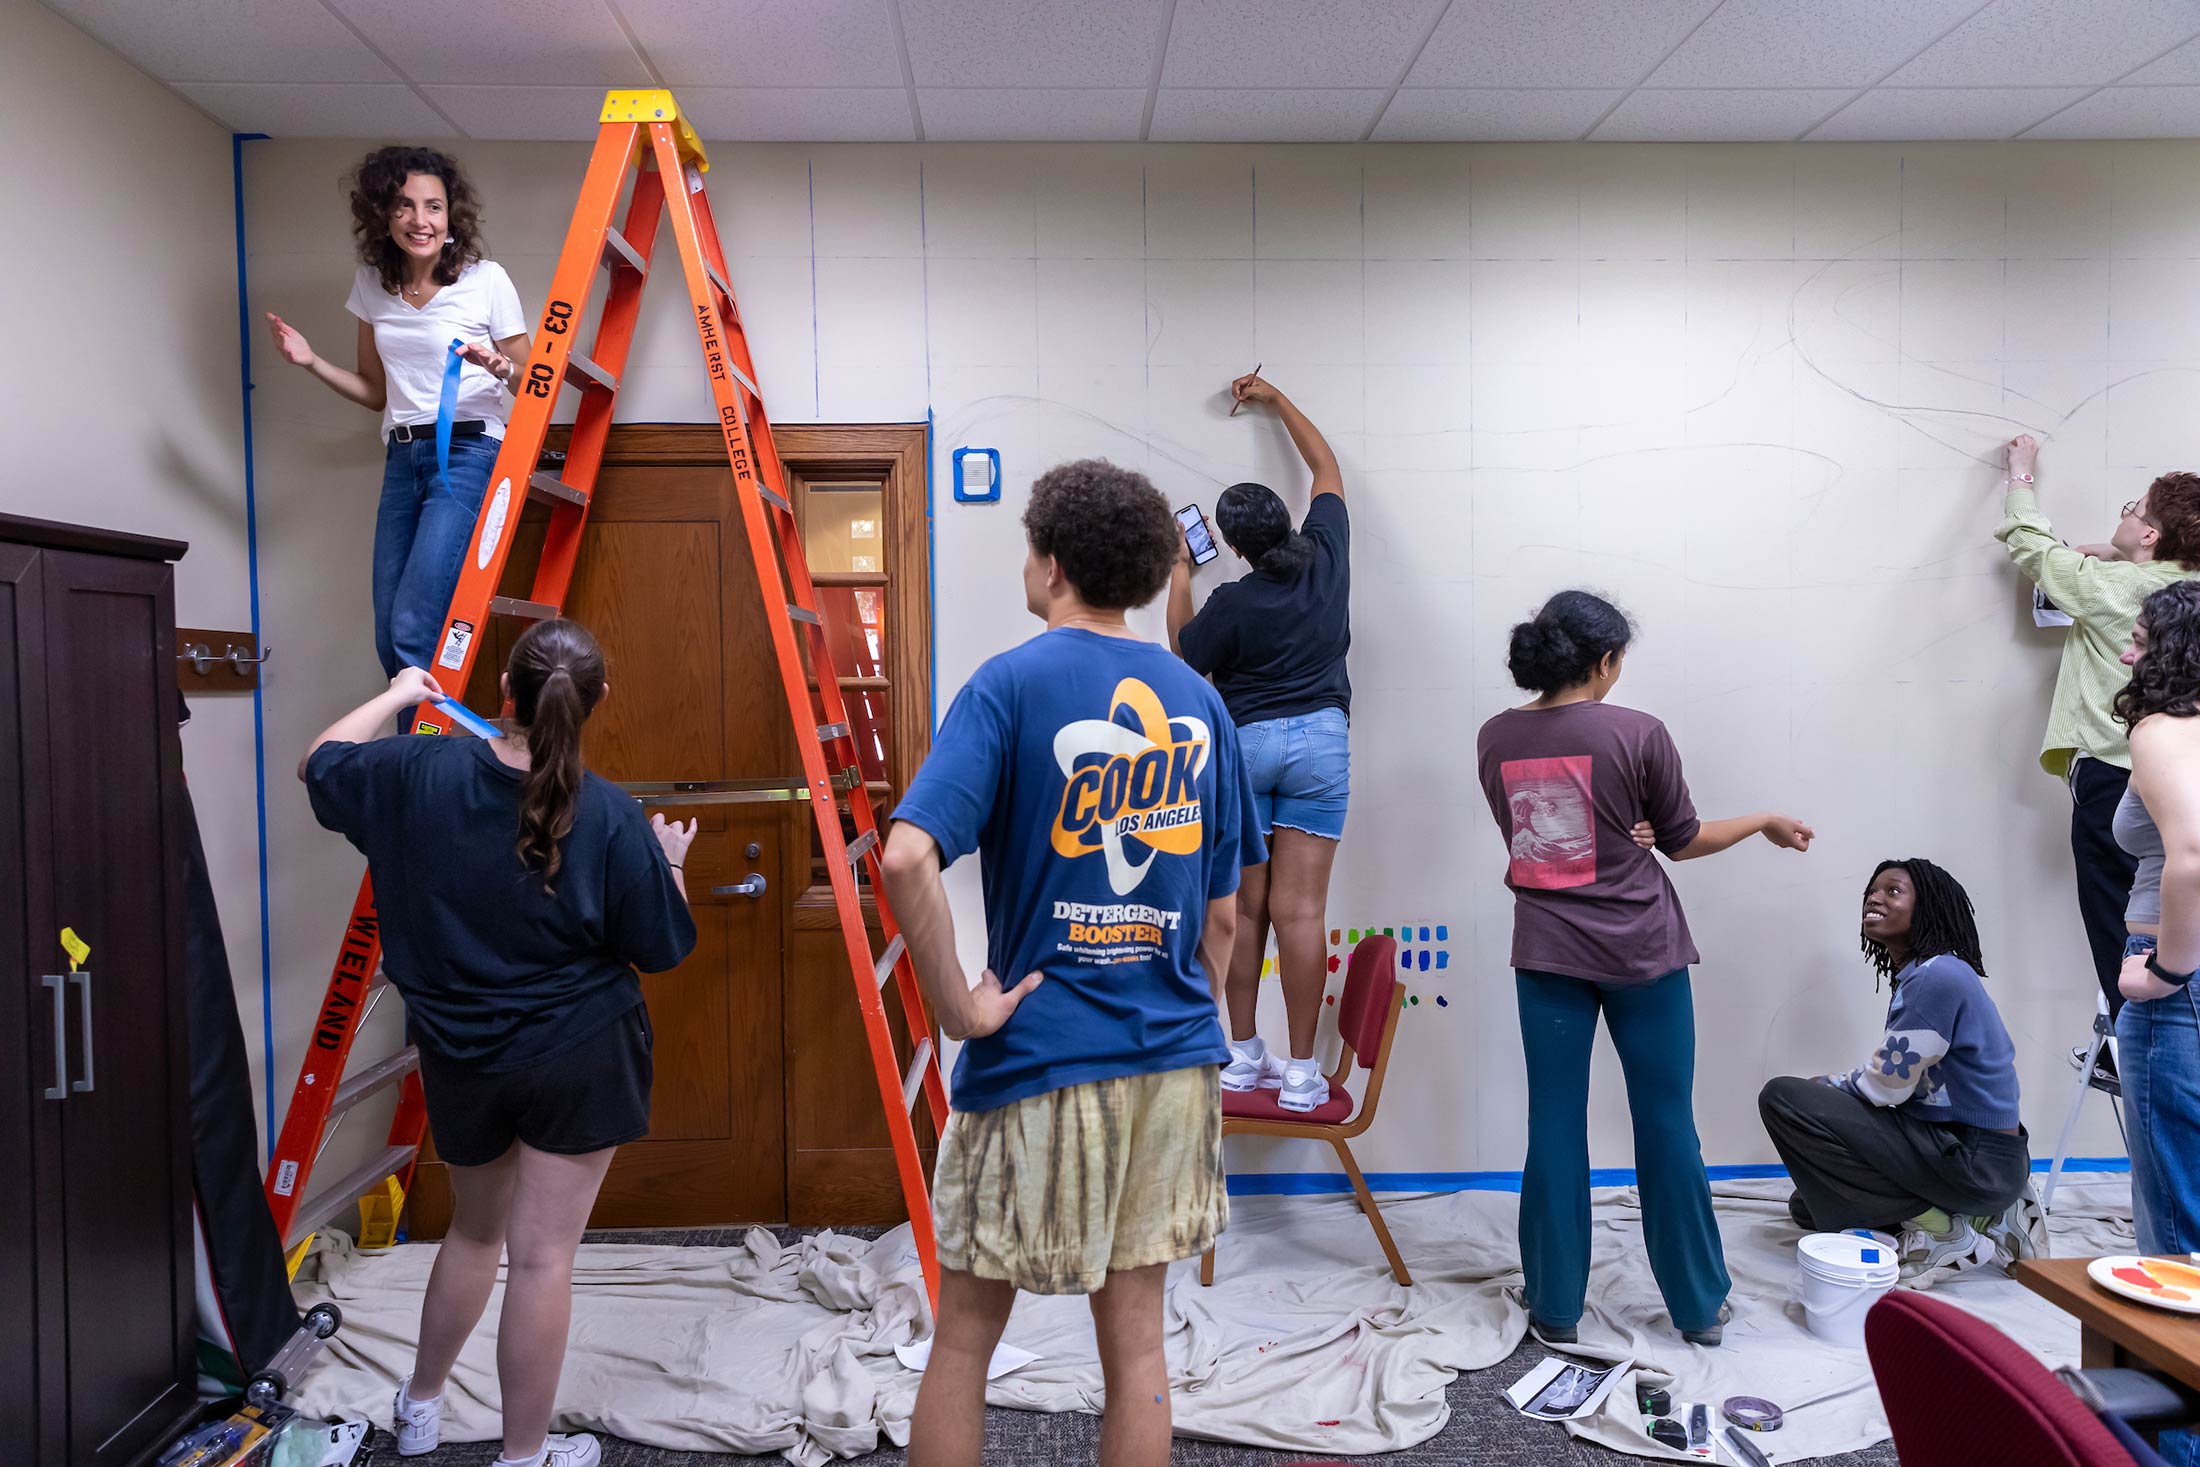 Art students, one on a ladder, begin painting a mural on a wall.